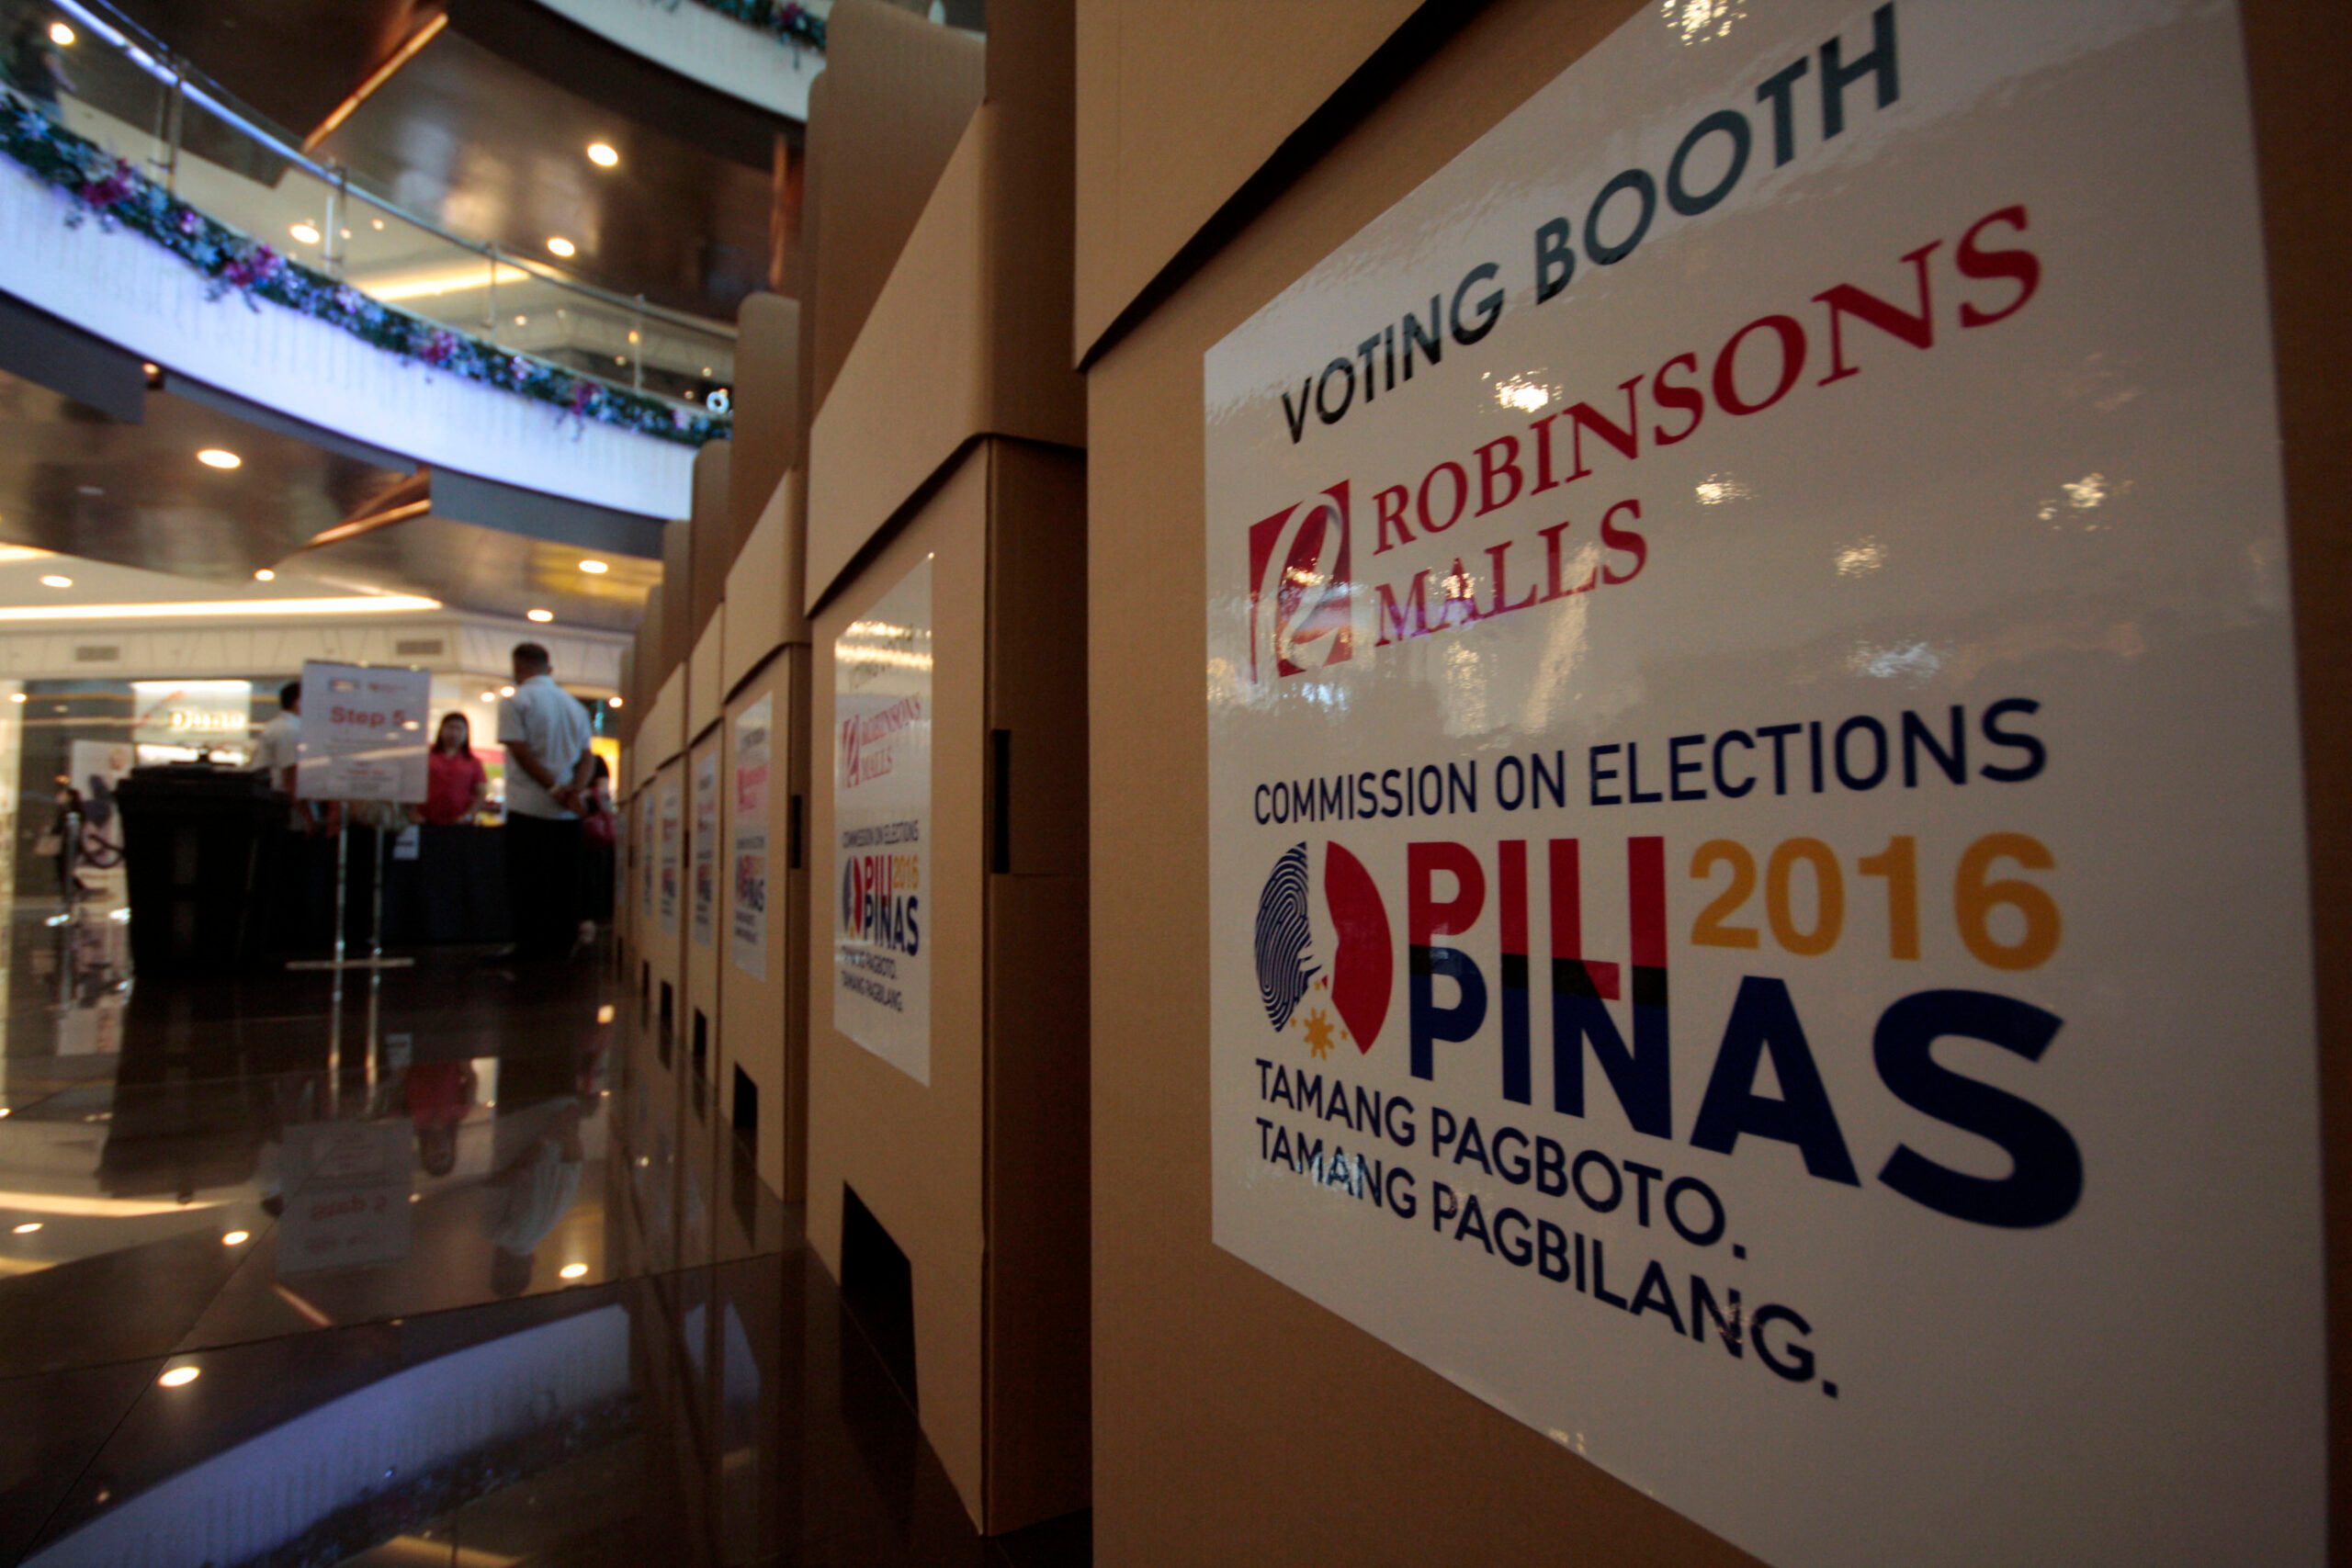 Comelec approves voting in malls in 2016